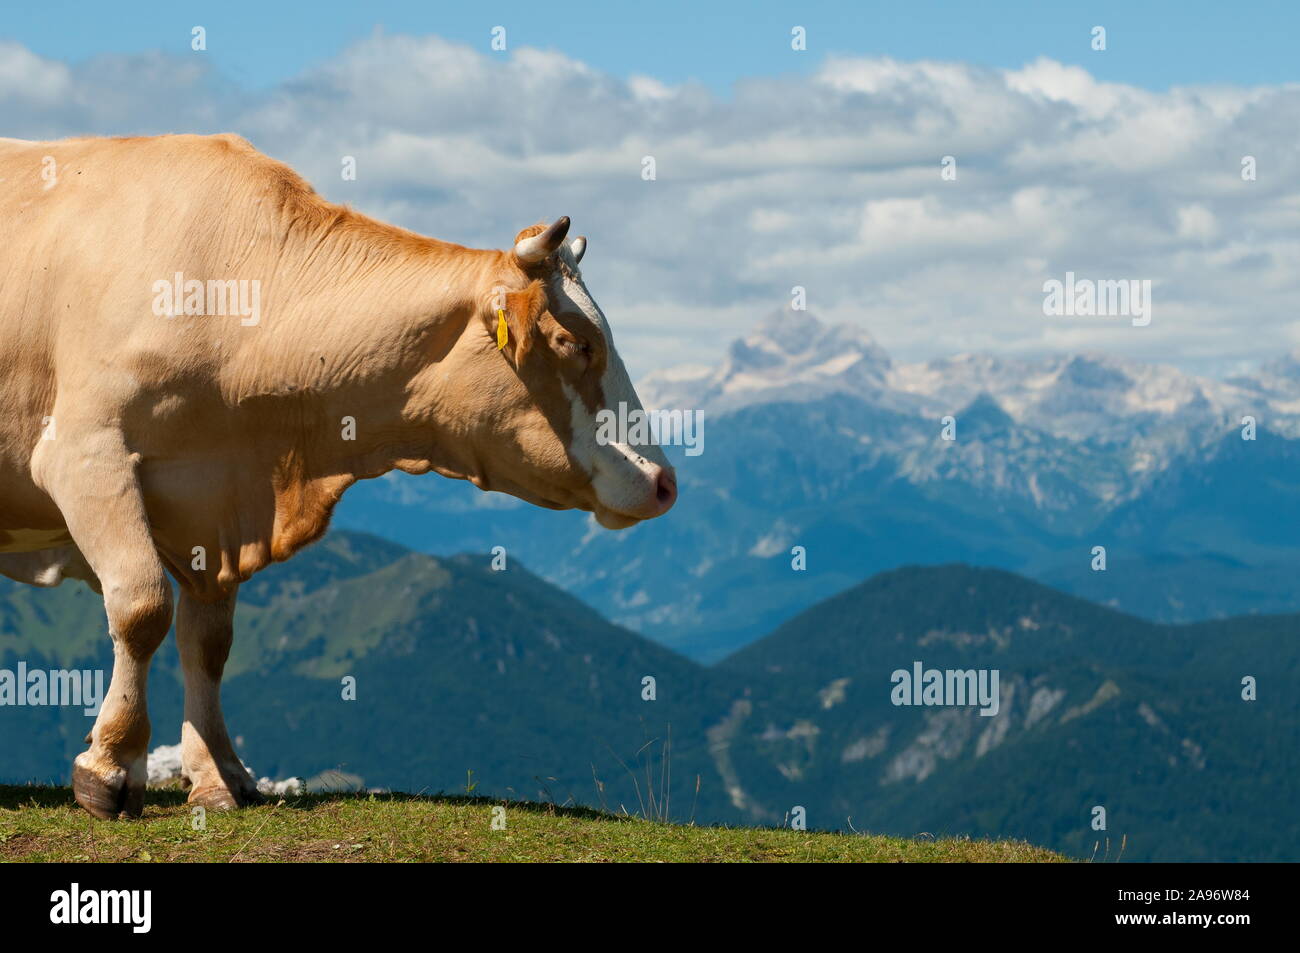 Cow overlooking mountainous regions of Slovenian Alps. Farming, dairy products, livestock and natural grazing concepts. Stock Photo